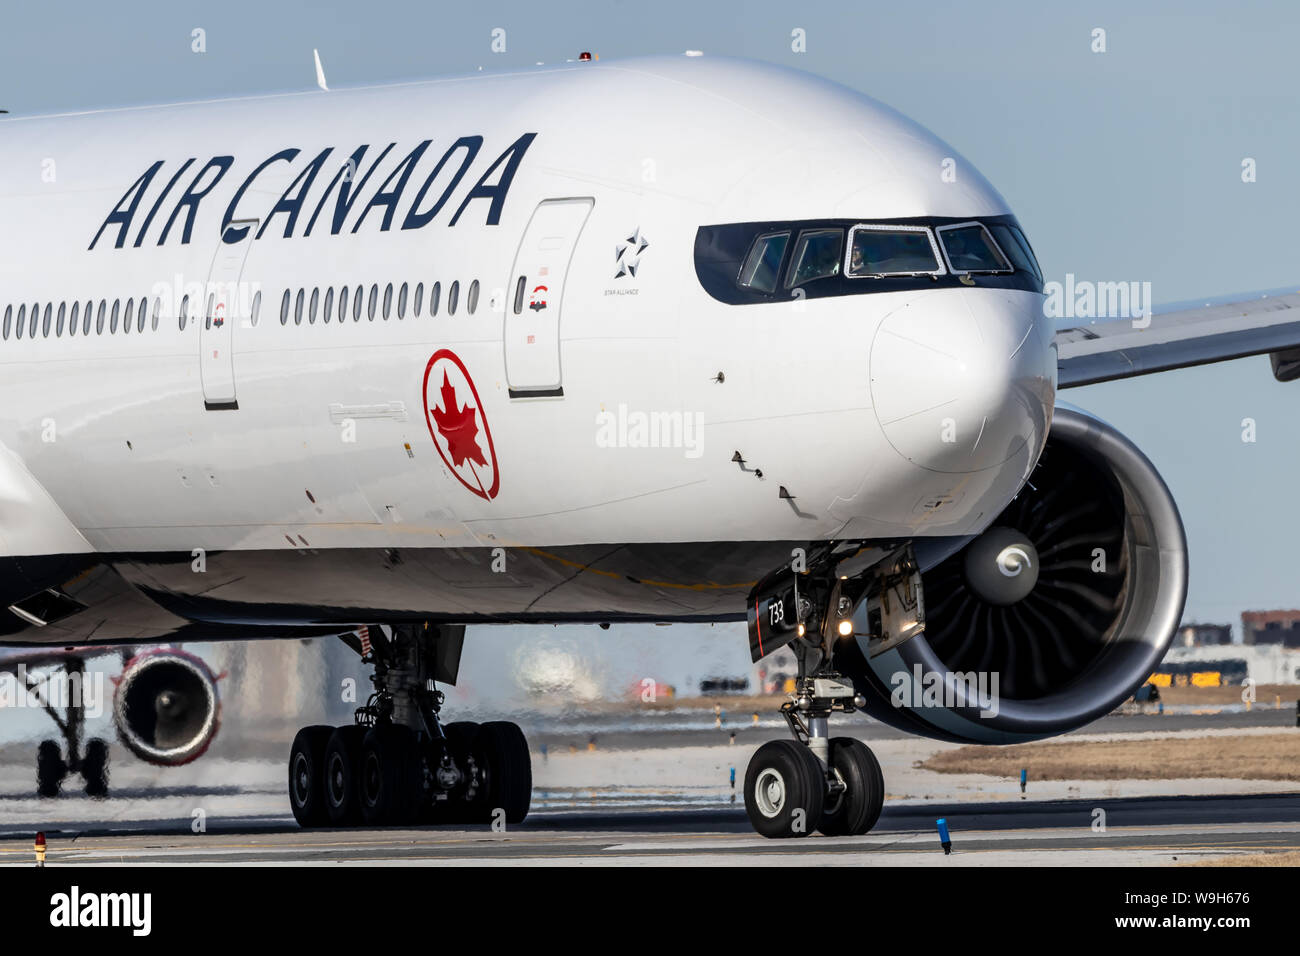 Air Canada Boeing 777-3 lining up for takeoff at Toronto Pearson Intl. Airport. Stock Photo